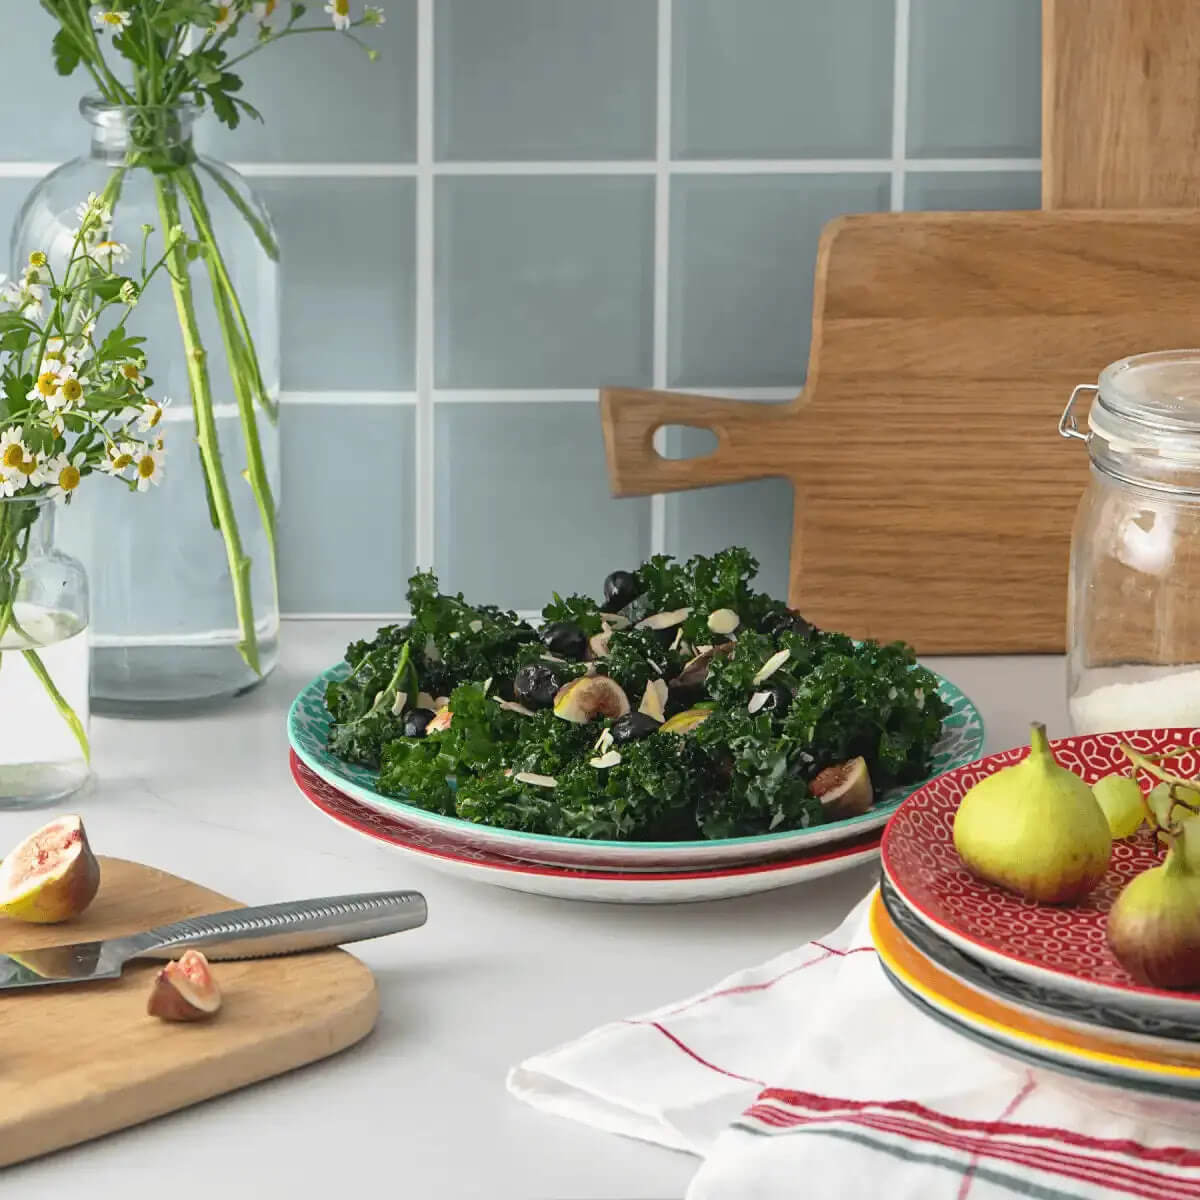 Dowan's Ceramic Dinner Sets: The Perfect Blend of Function and Style